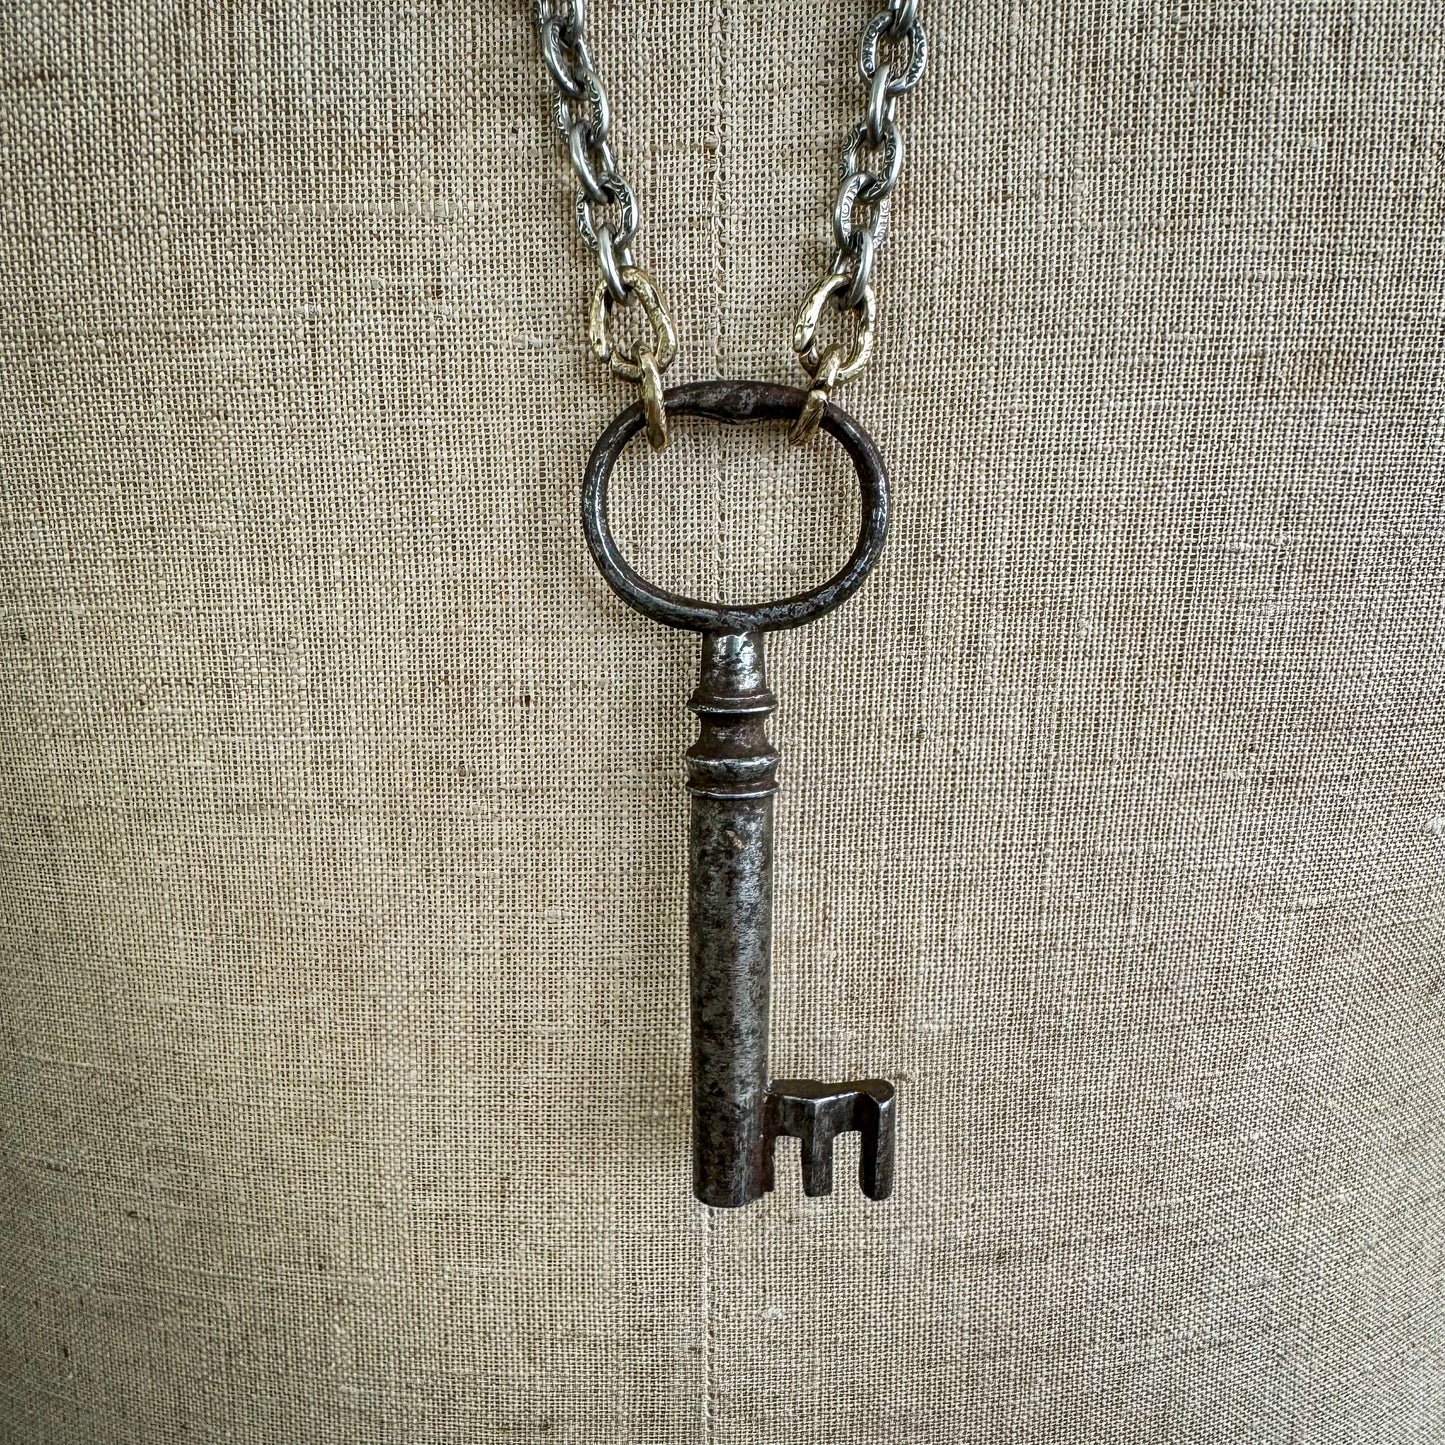 Holding The Key Necklace